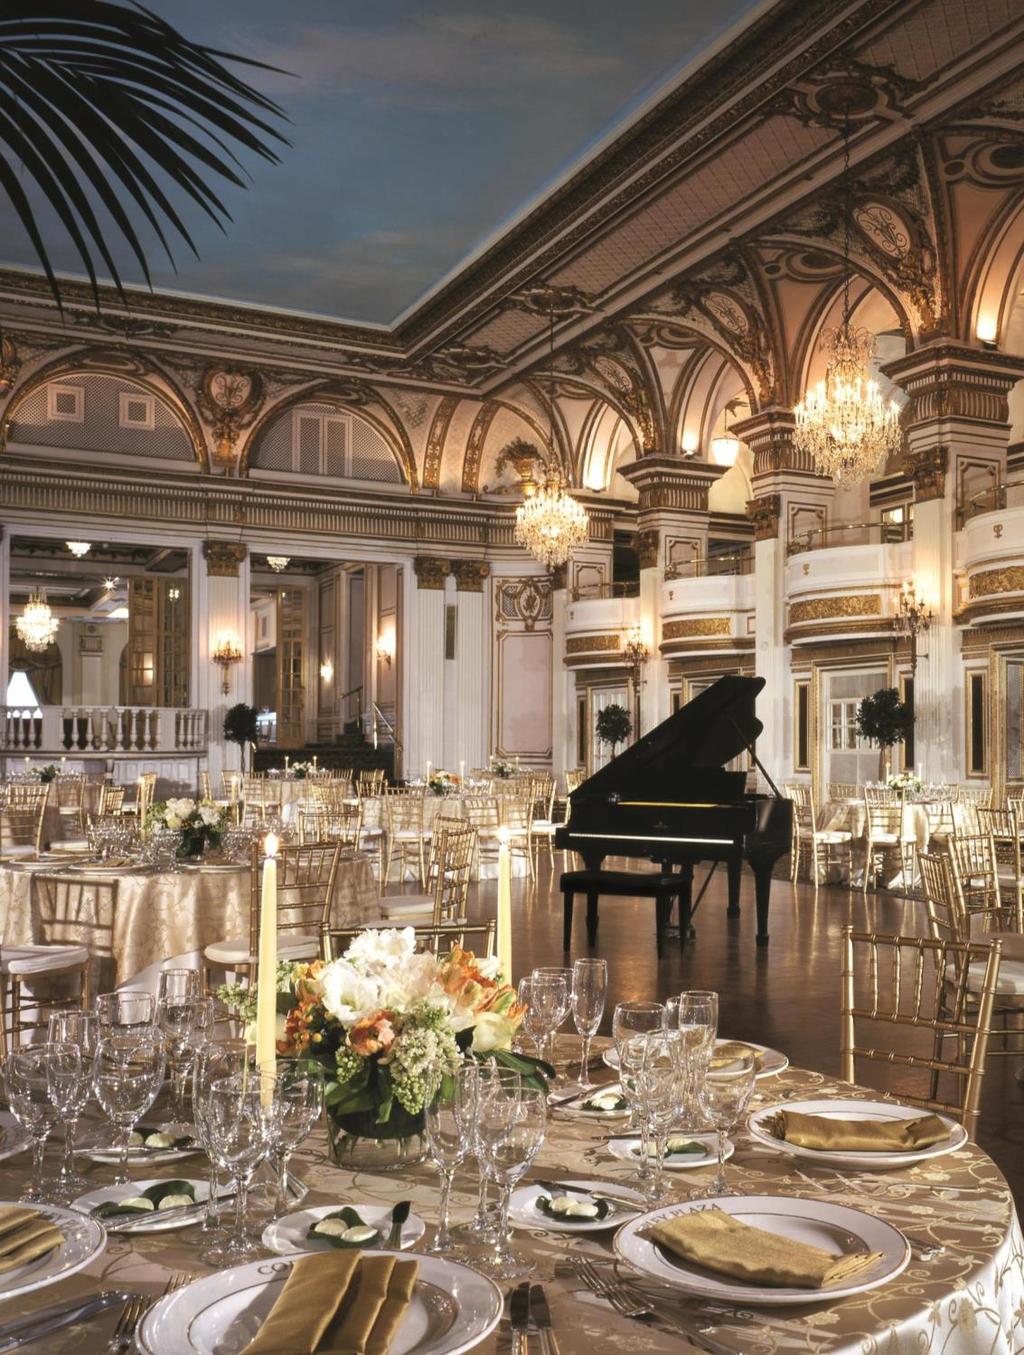 Fairmont Copley Plaza, Boston, USA ICONIC MEETING AND EVENT SPACES Event planners around the world seek out Fairmont as the leading operator of luxury hotels of scale: hotels that can accommodate